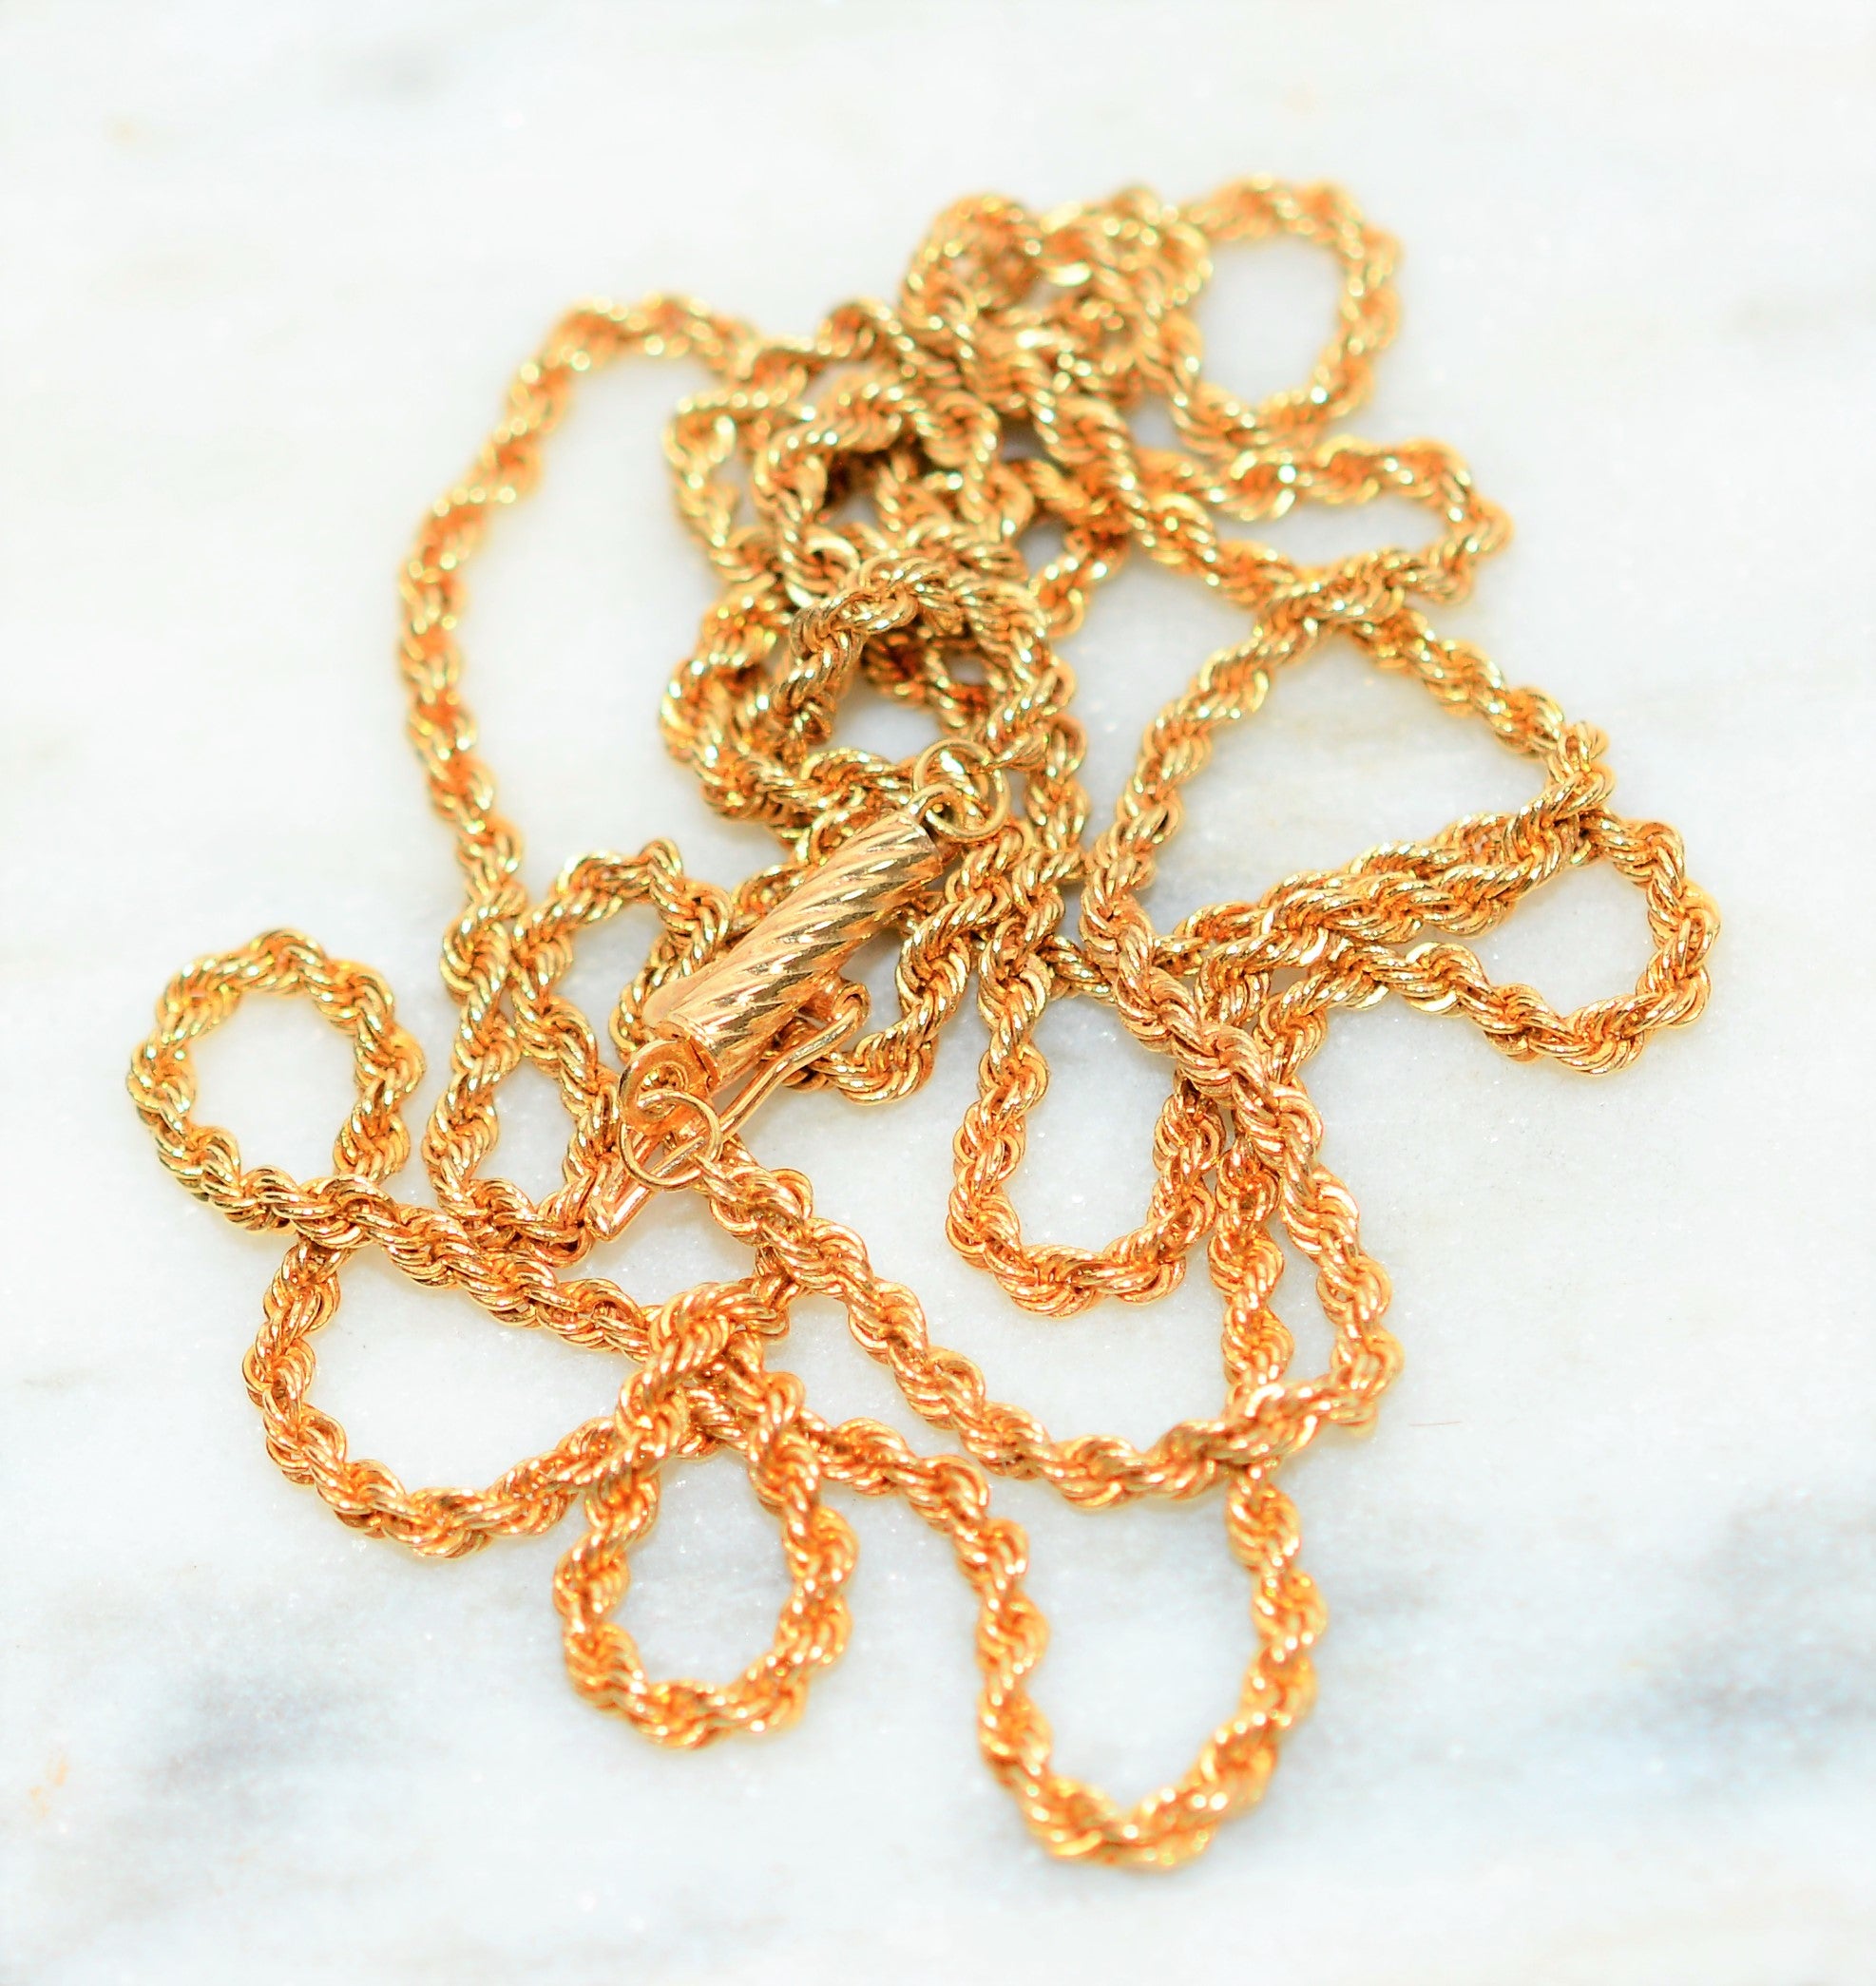 14K Solid Gold Twist Rope Chain Necklace 24" 1.75mm 7.2 Grams Extra Long Necklace Long Gold Chain Estate Jewelry Fine Jewelry Vintage Chain